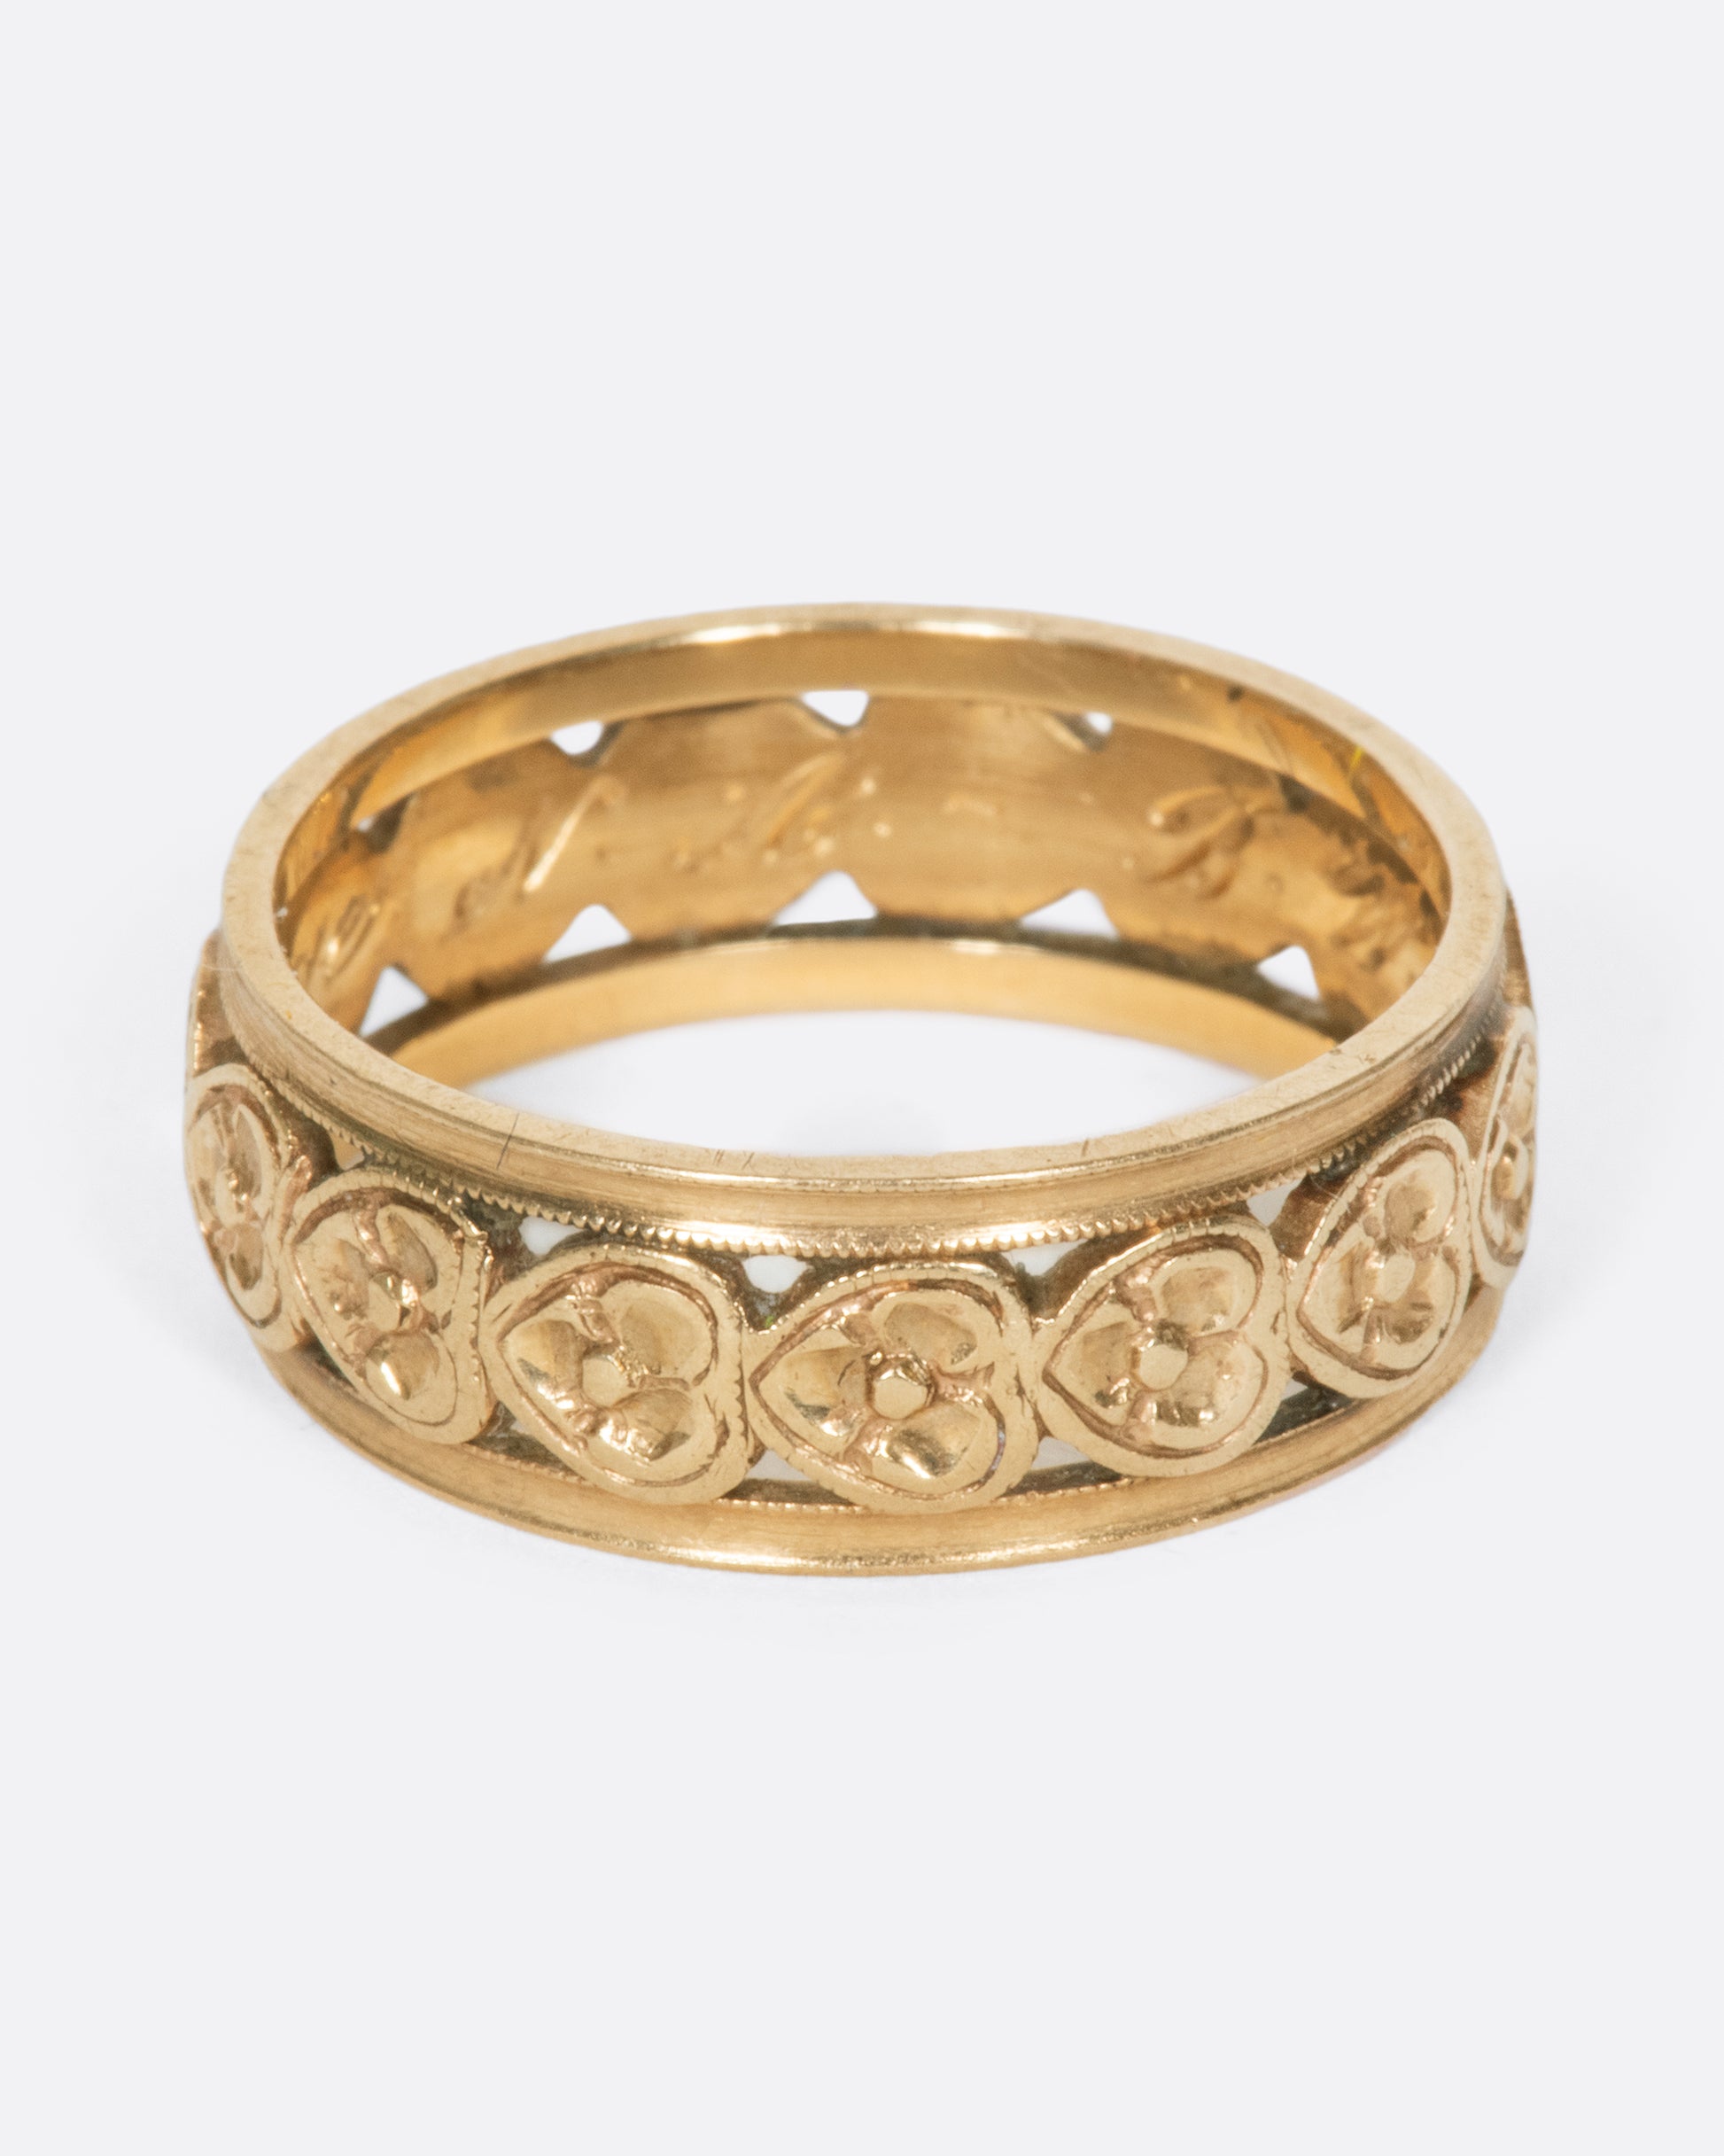 A yellow gold band ring lined with sideways hearts, shown from the side.